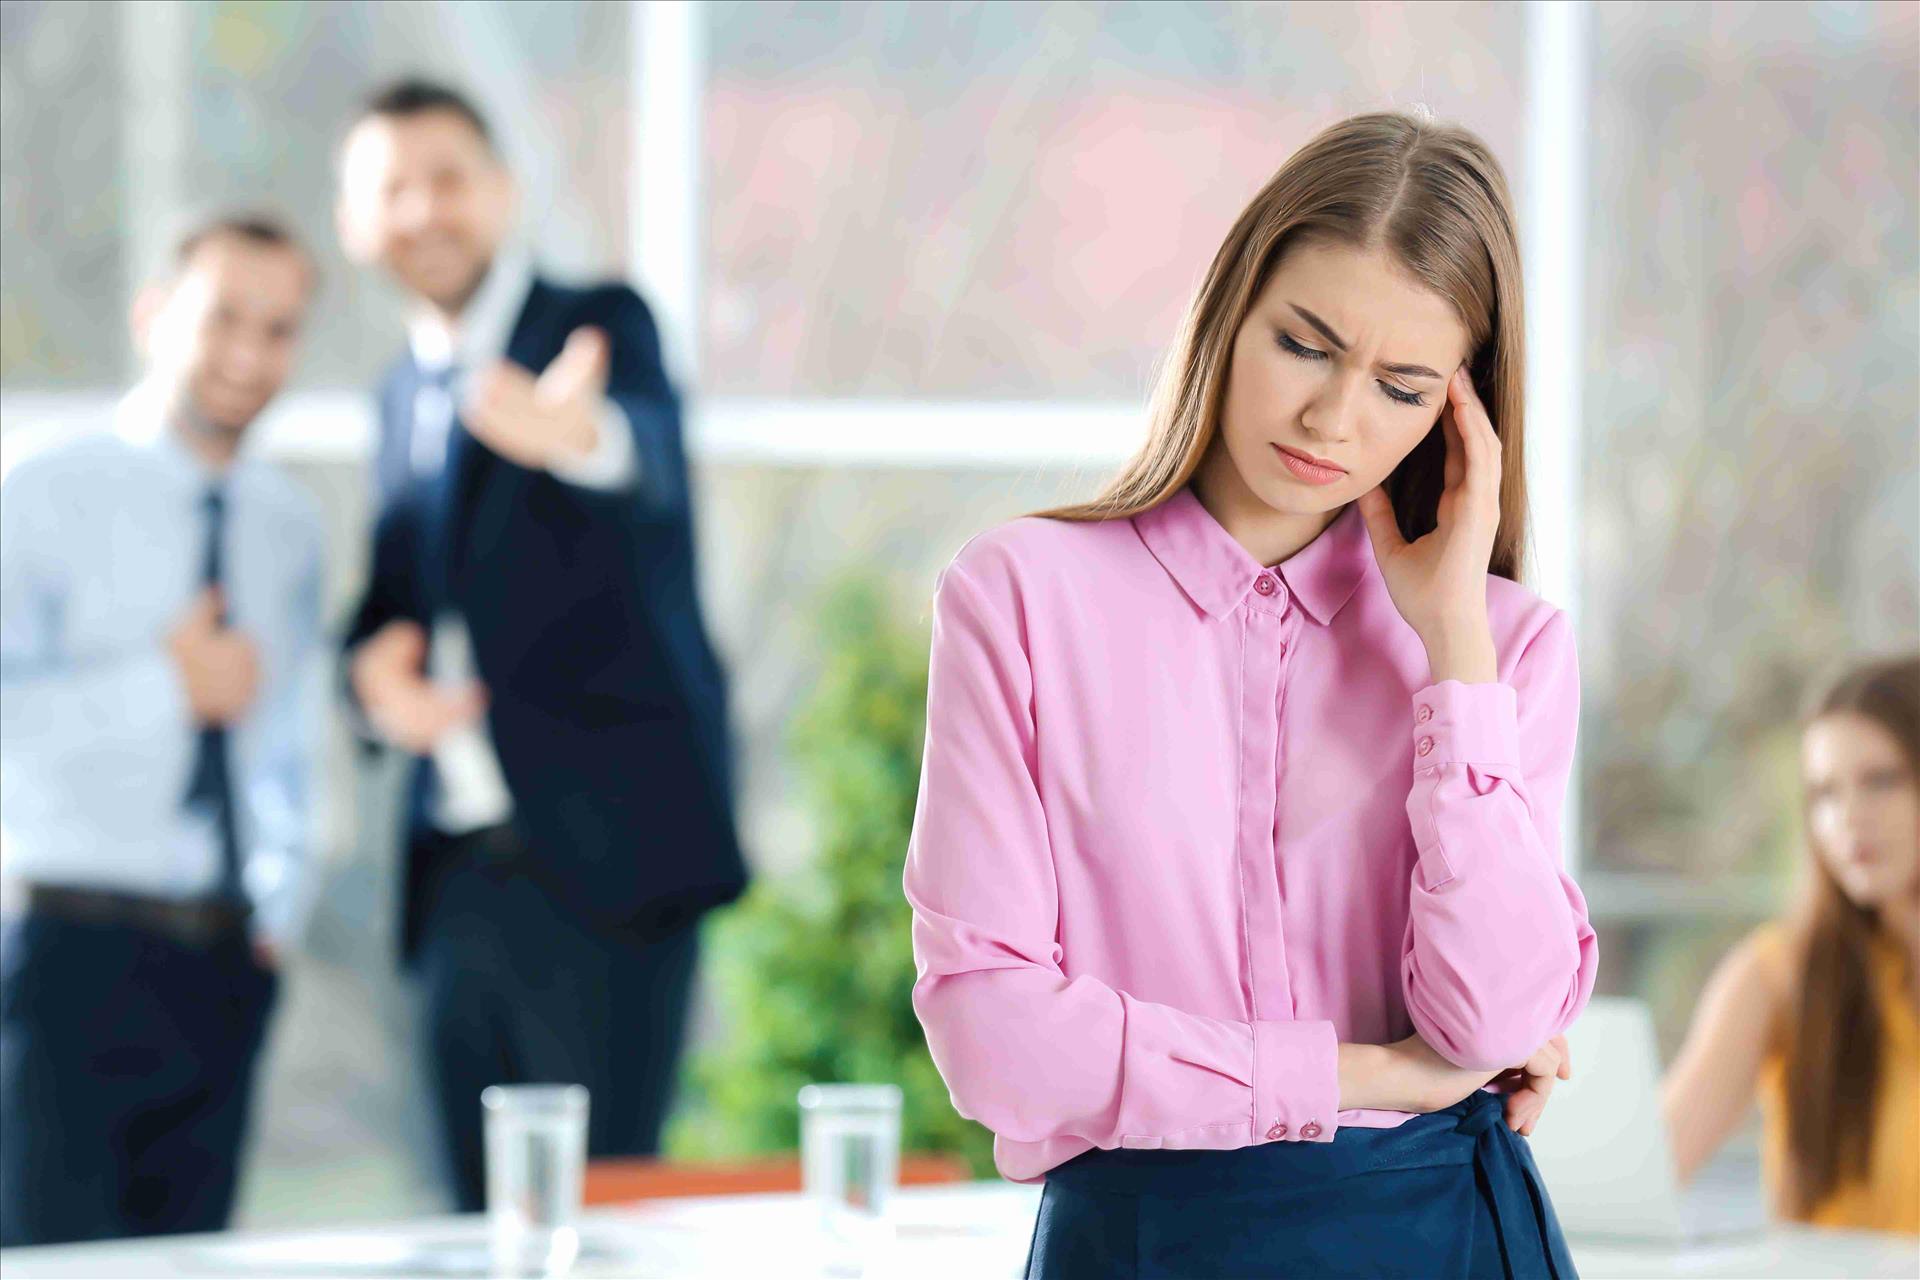 How to Identify and Tackle Workplace Bullying